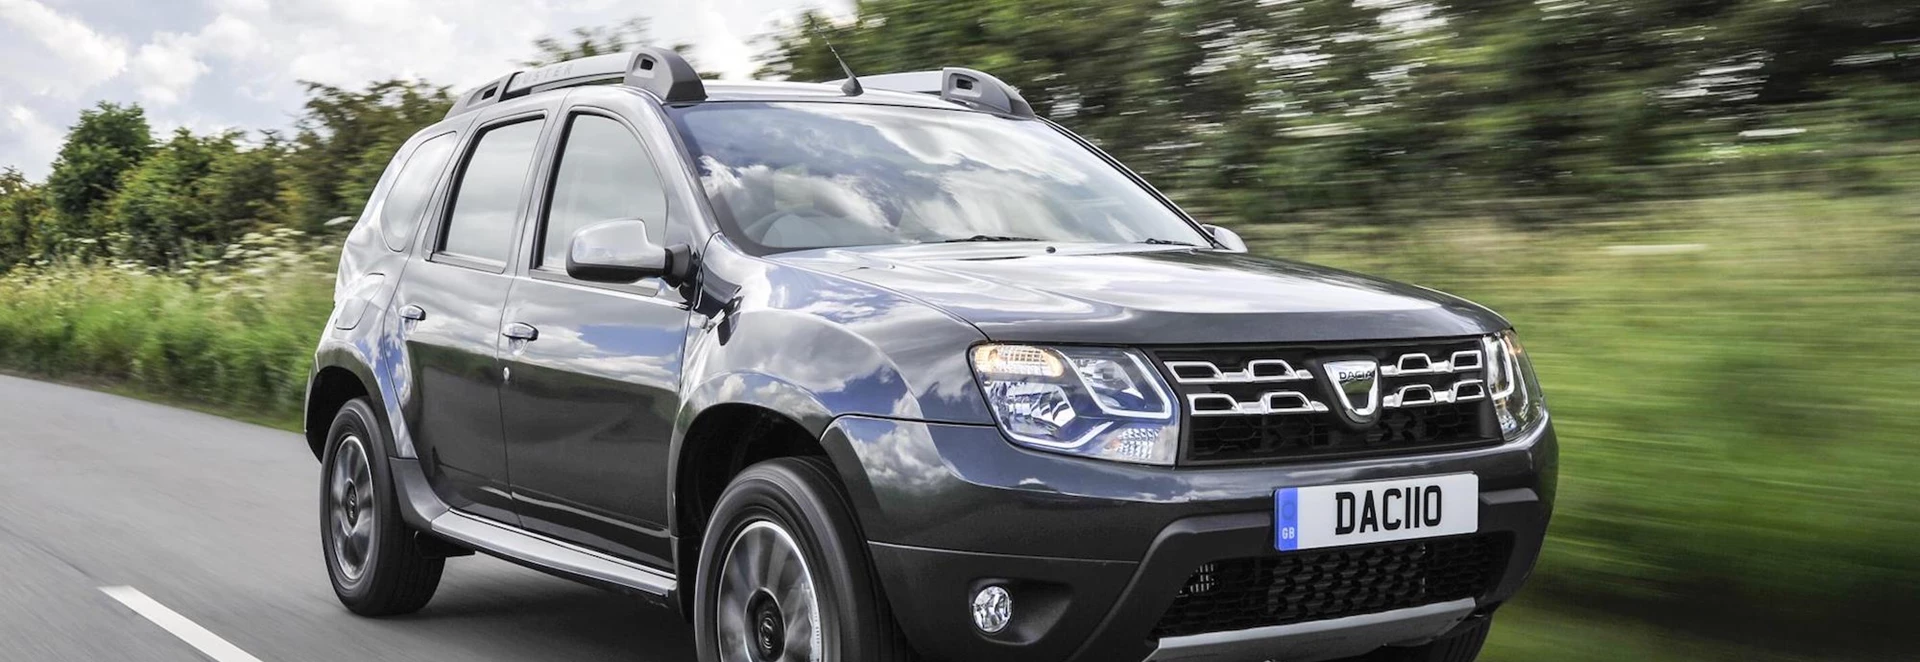 Dacia now offering up to £2,000 off a Duster under its scrappage scheme 